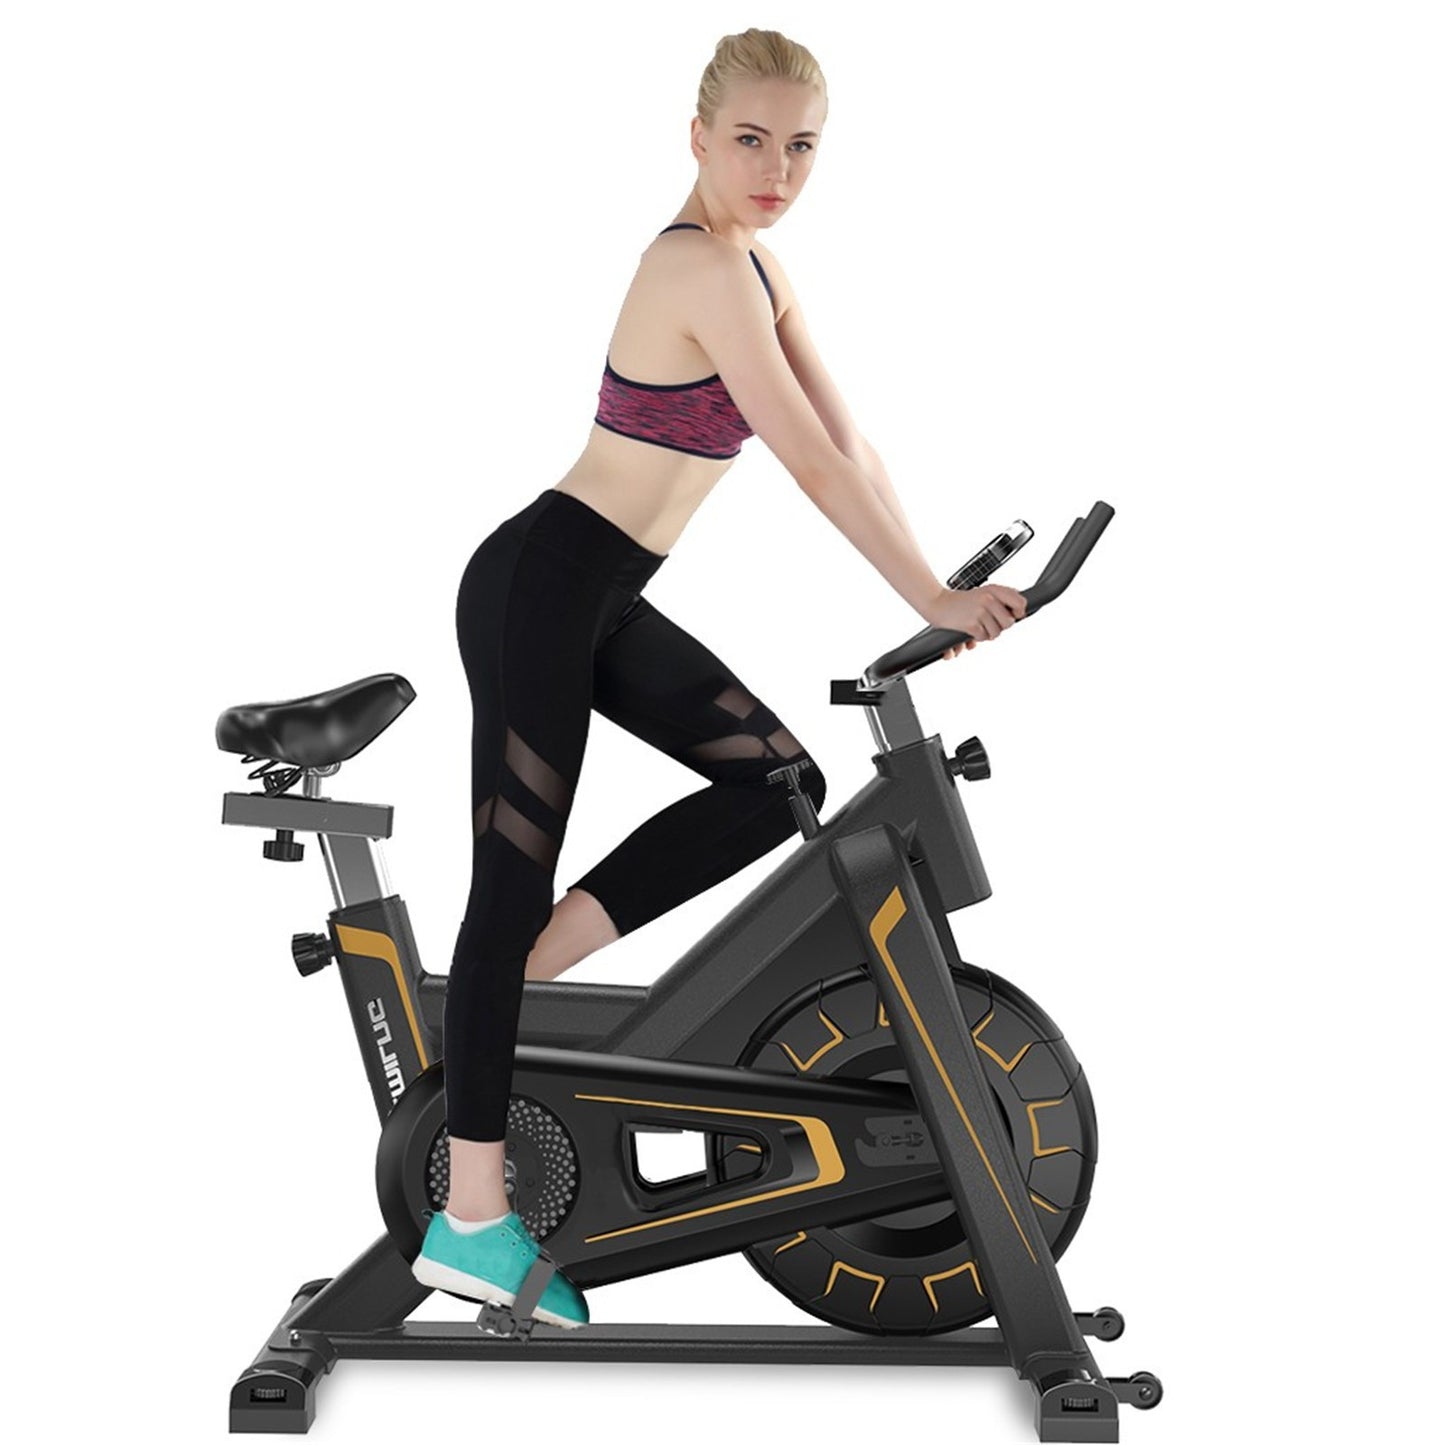 Exercise Bike Bicycle Fitness Exercise Aerobic Exercise Home Indoor